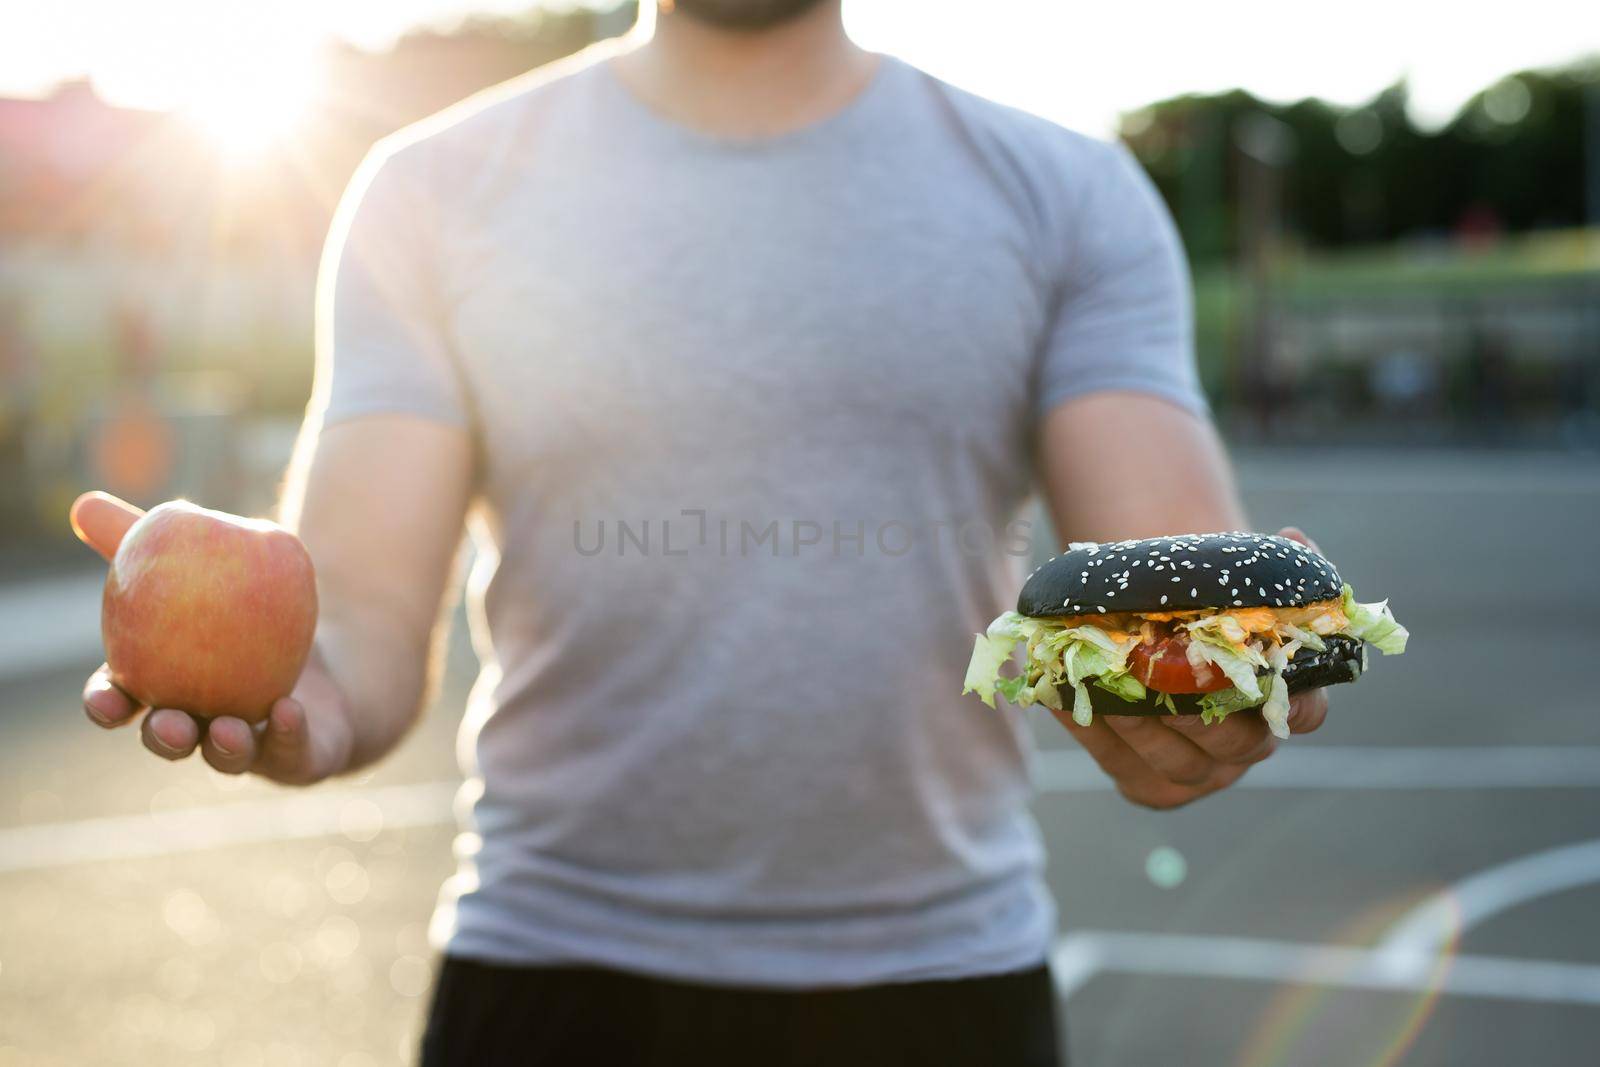 Young athletic man in a t-shirt holds a Burger and an Apple in the background of the stadium, a choice of healthy and unhealthy food. by StudioPeace